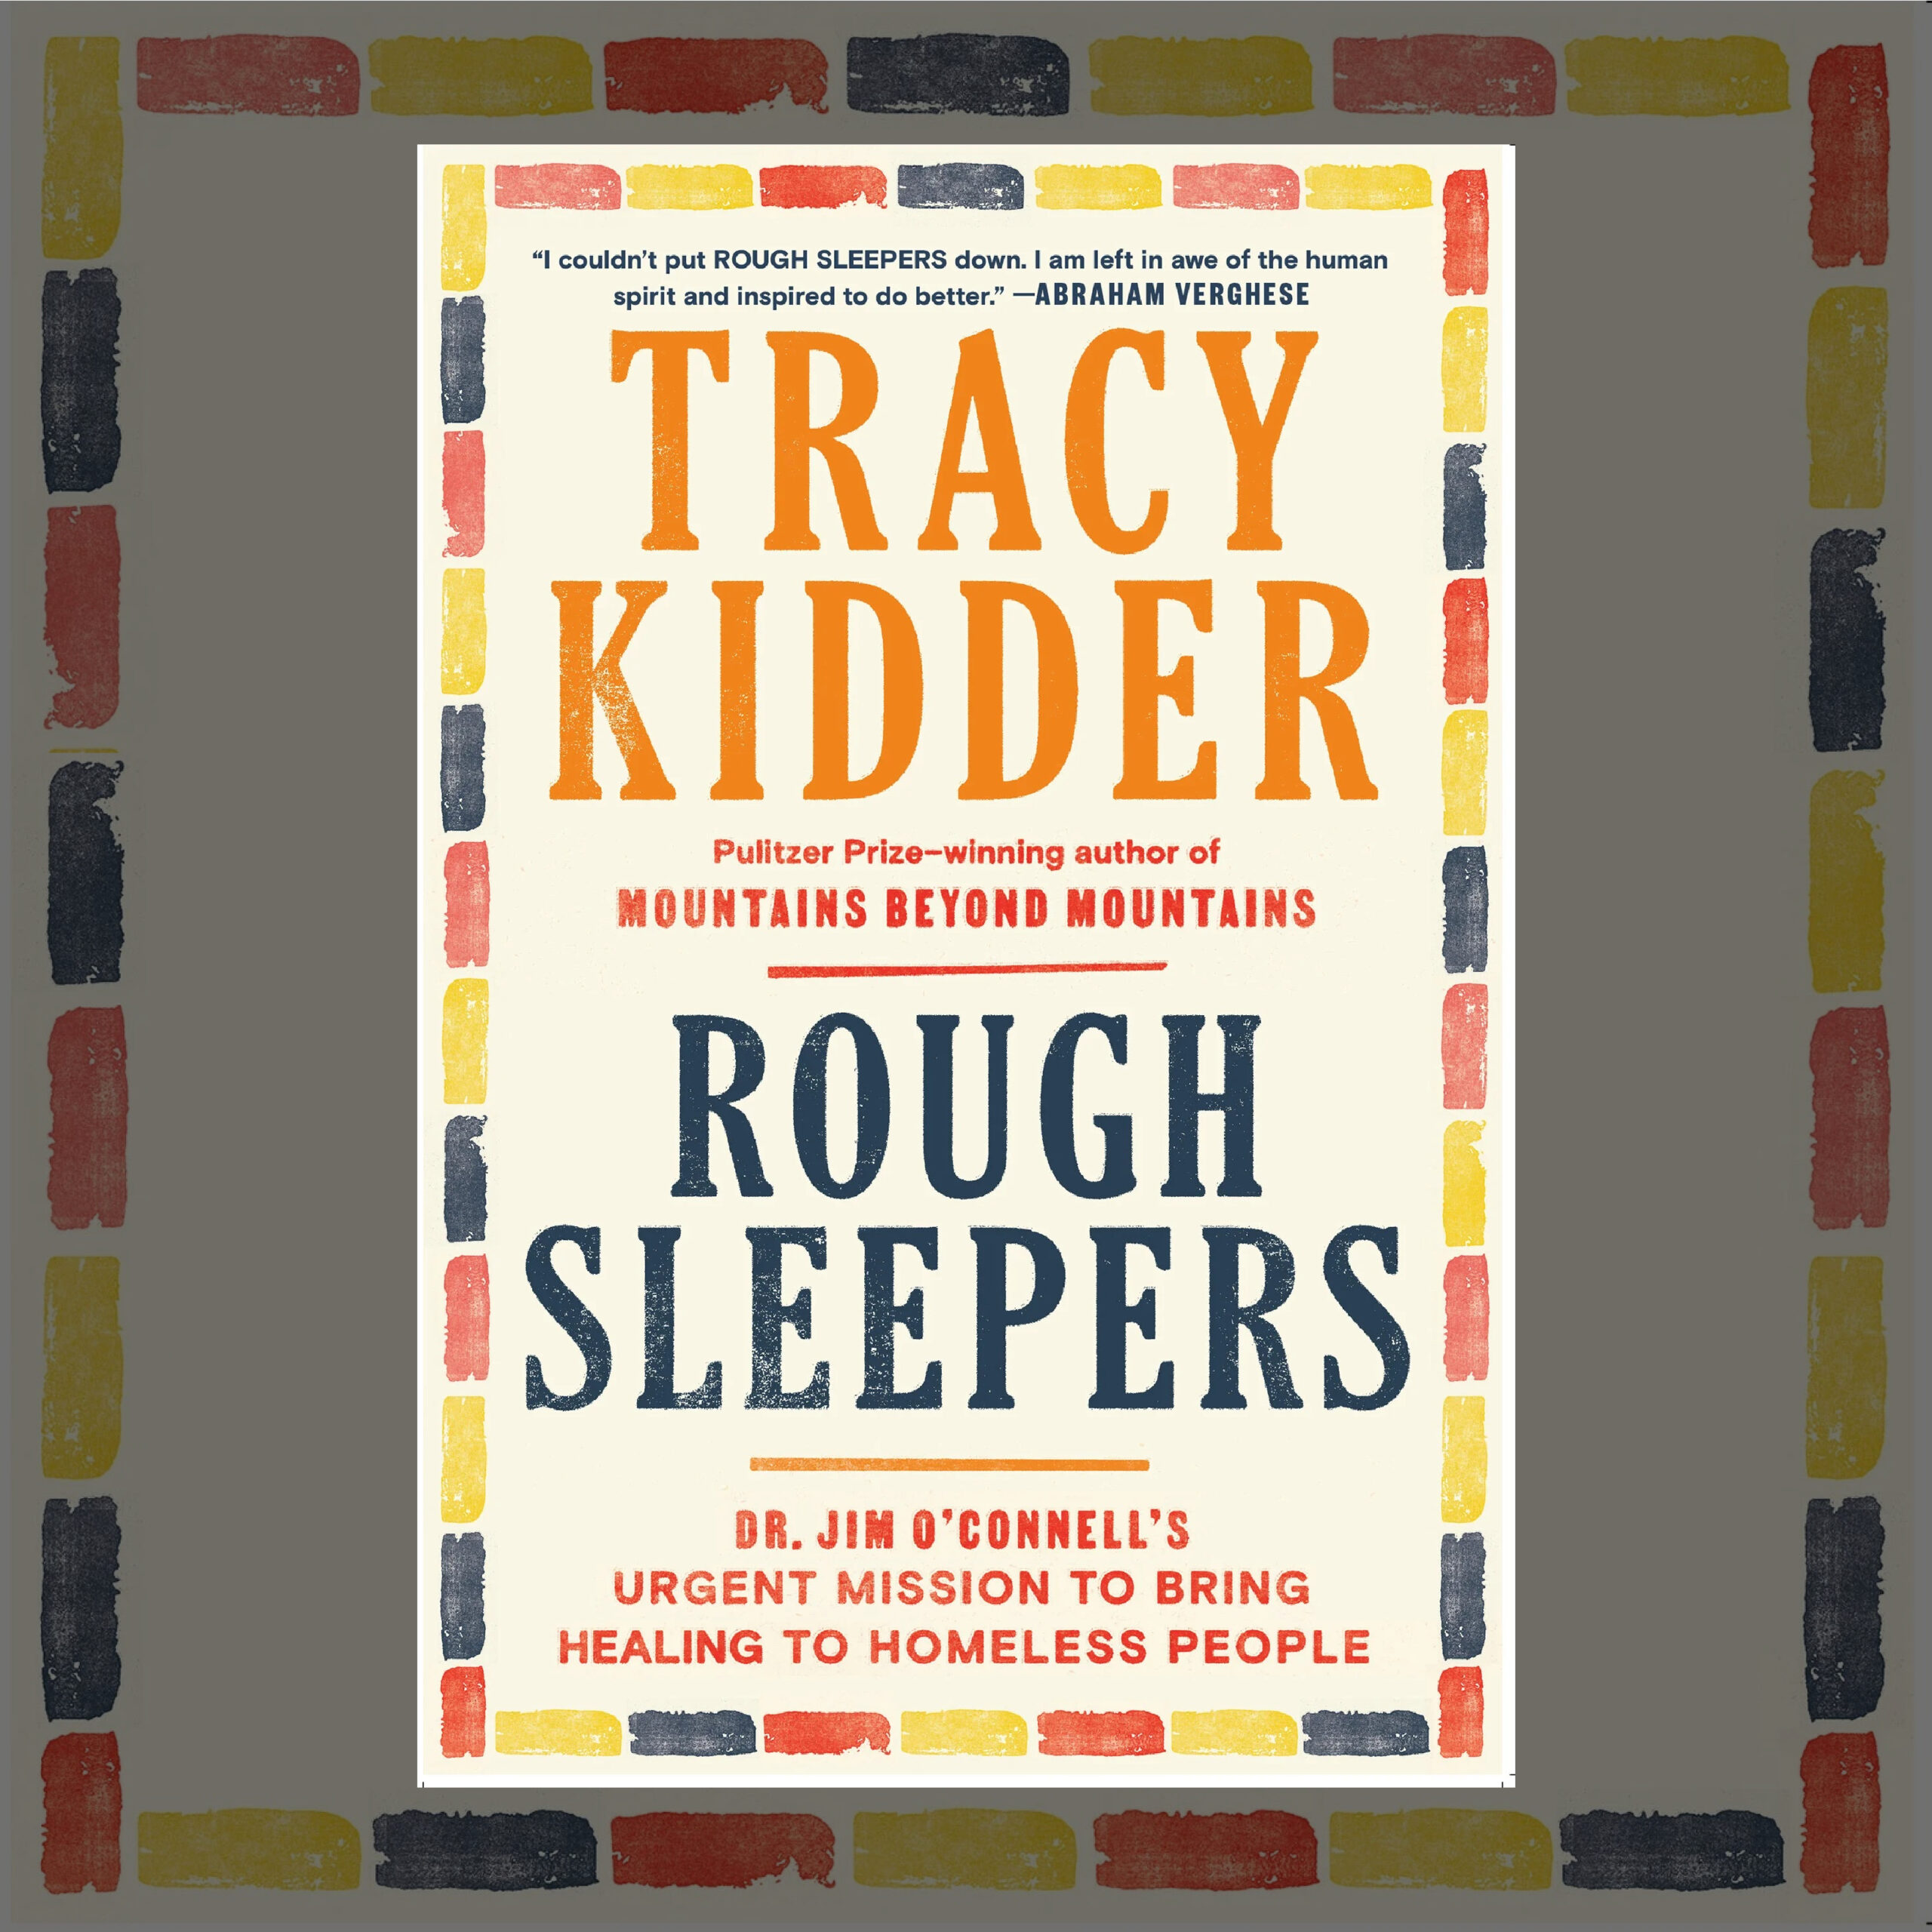 1804 - Tracy Kidder and Dr. Jim O'Connell - Rough Sleepers (Part 2) | The Book Show